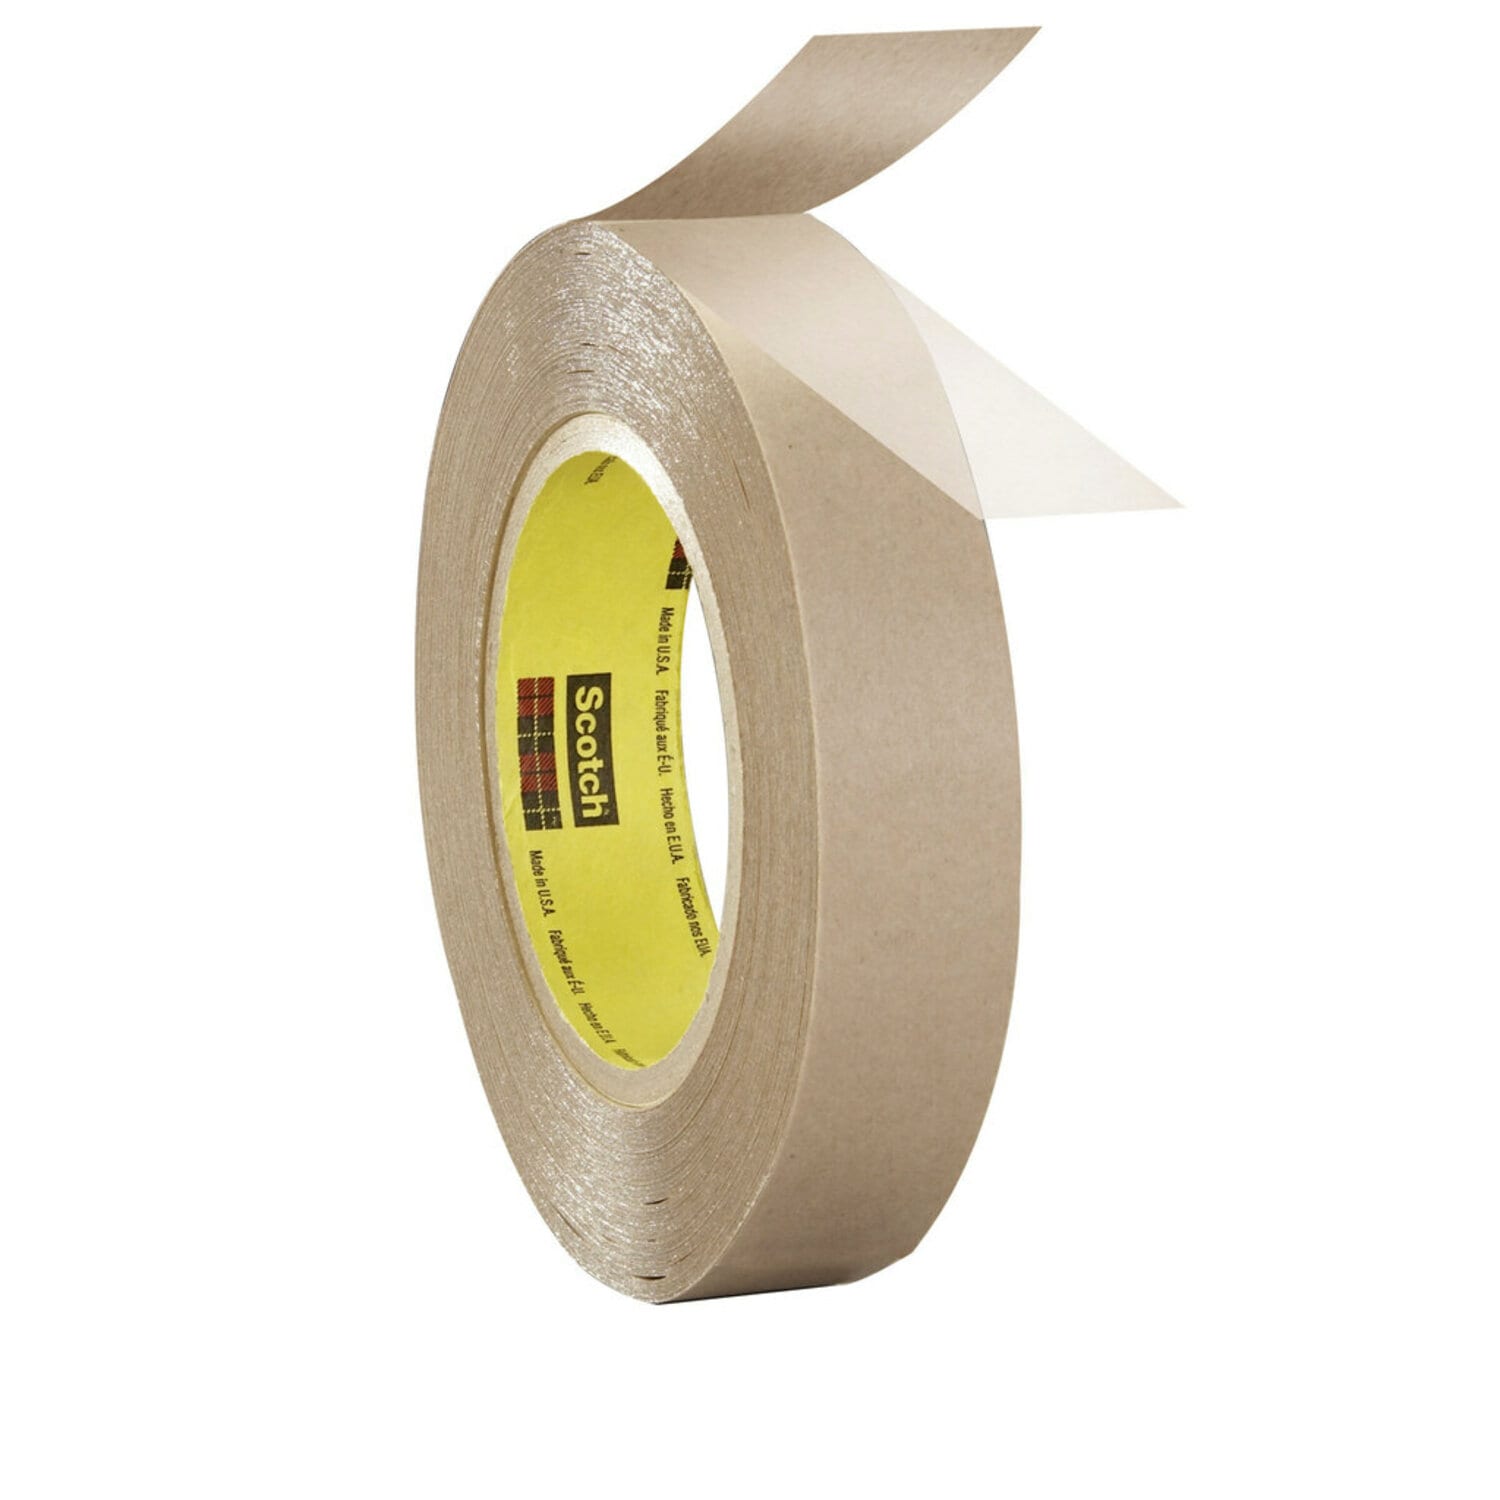 7100012239 - 3M Double Coated Tape 9832, Clear, 4.8 mil, Roll, Config